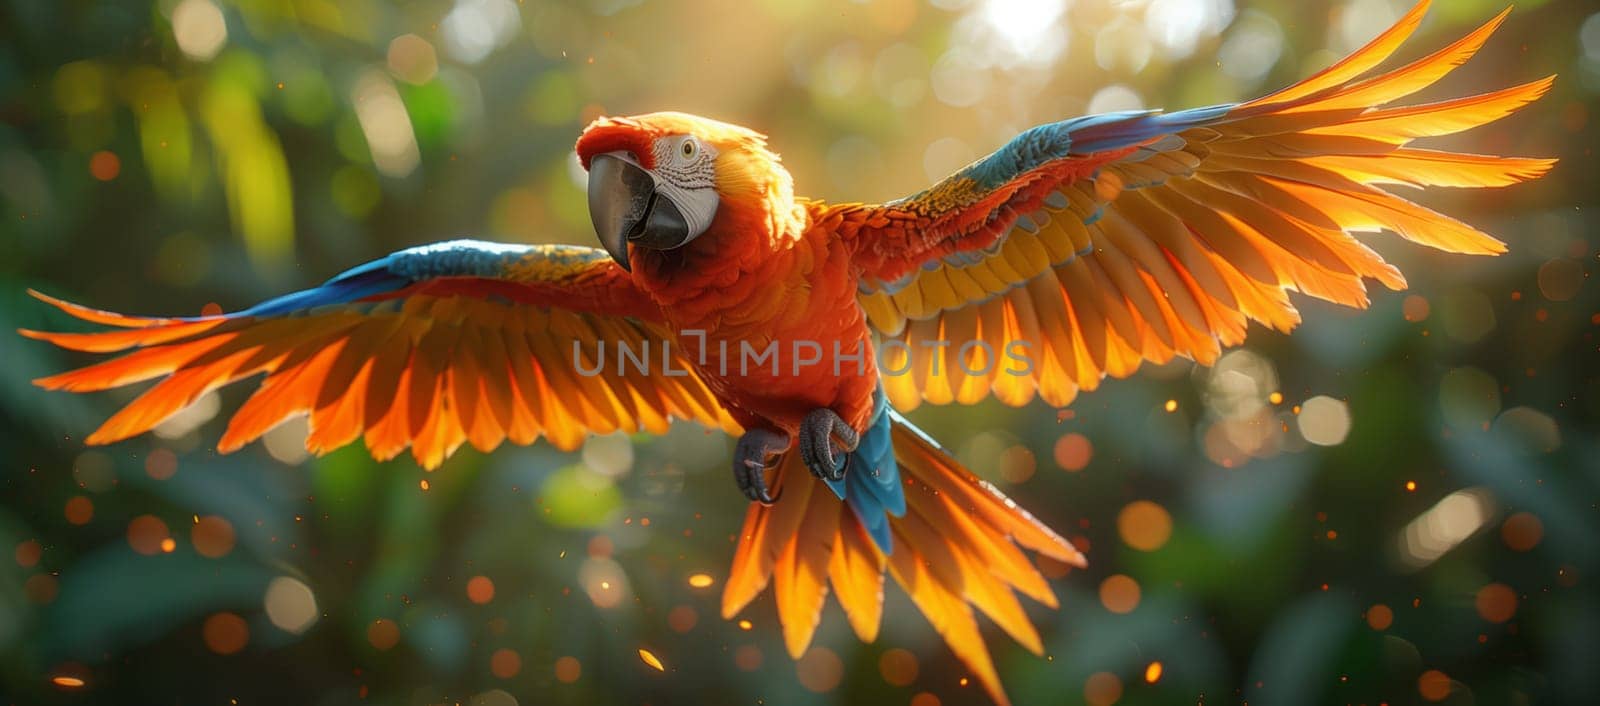 A colorful parrot with spread wings flying through the air by richwolf